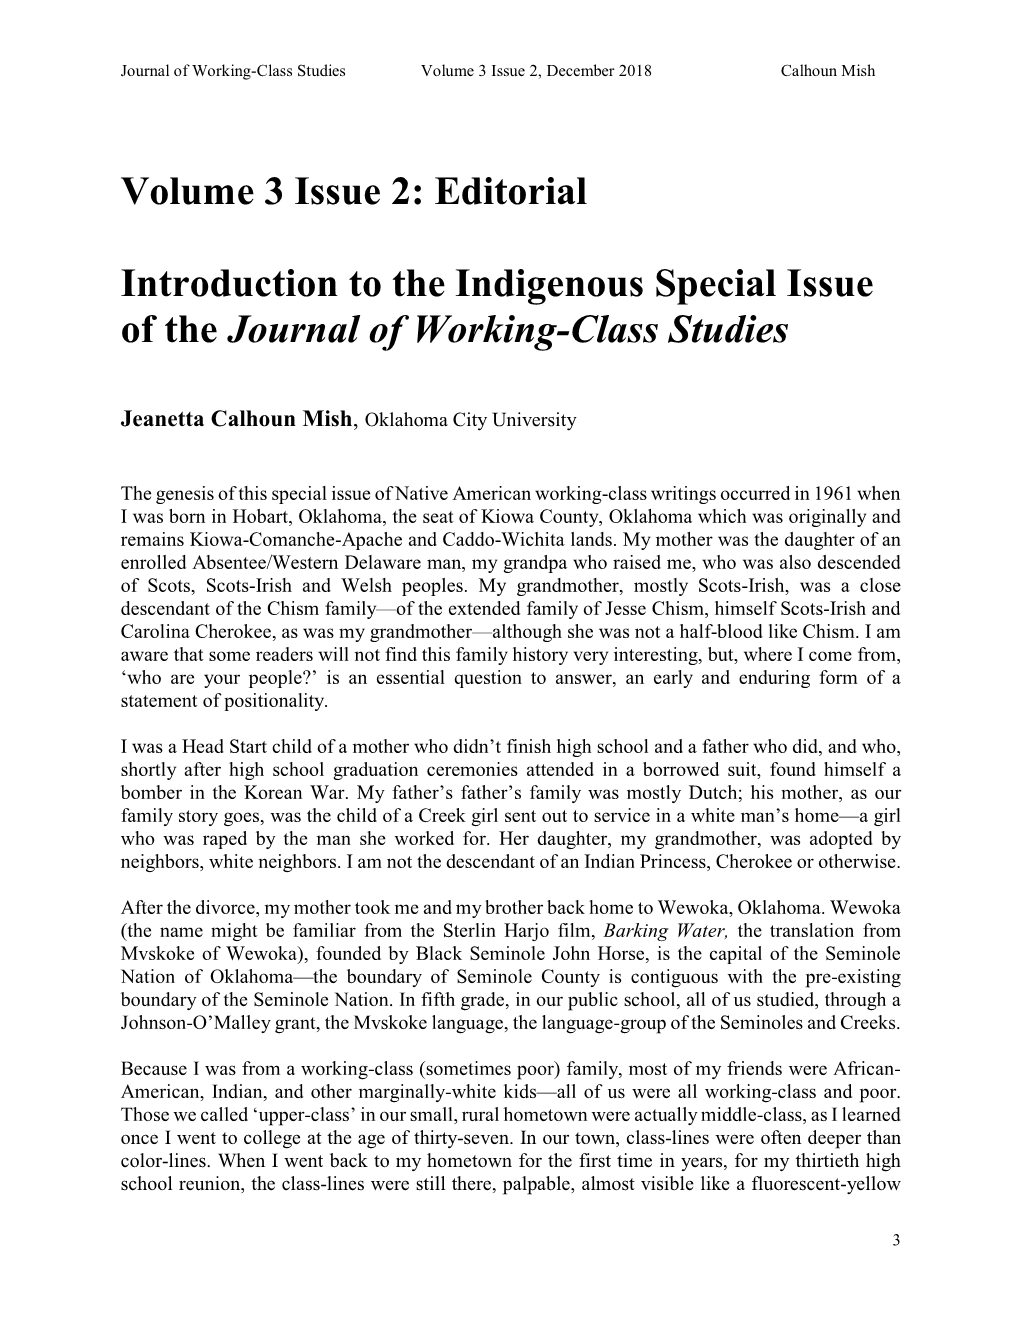 Editorial Introduction to the Indigenous Special Issue of the Journal Of